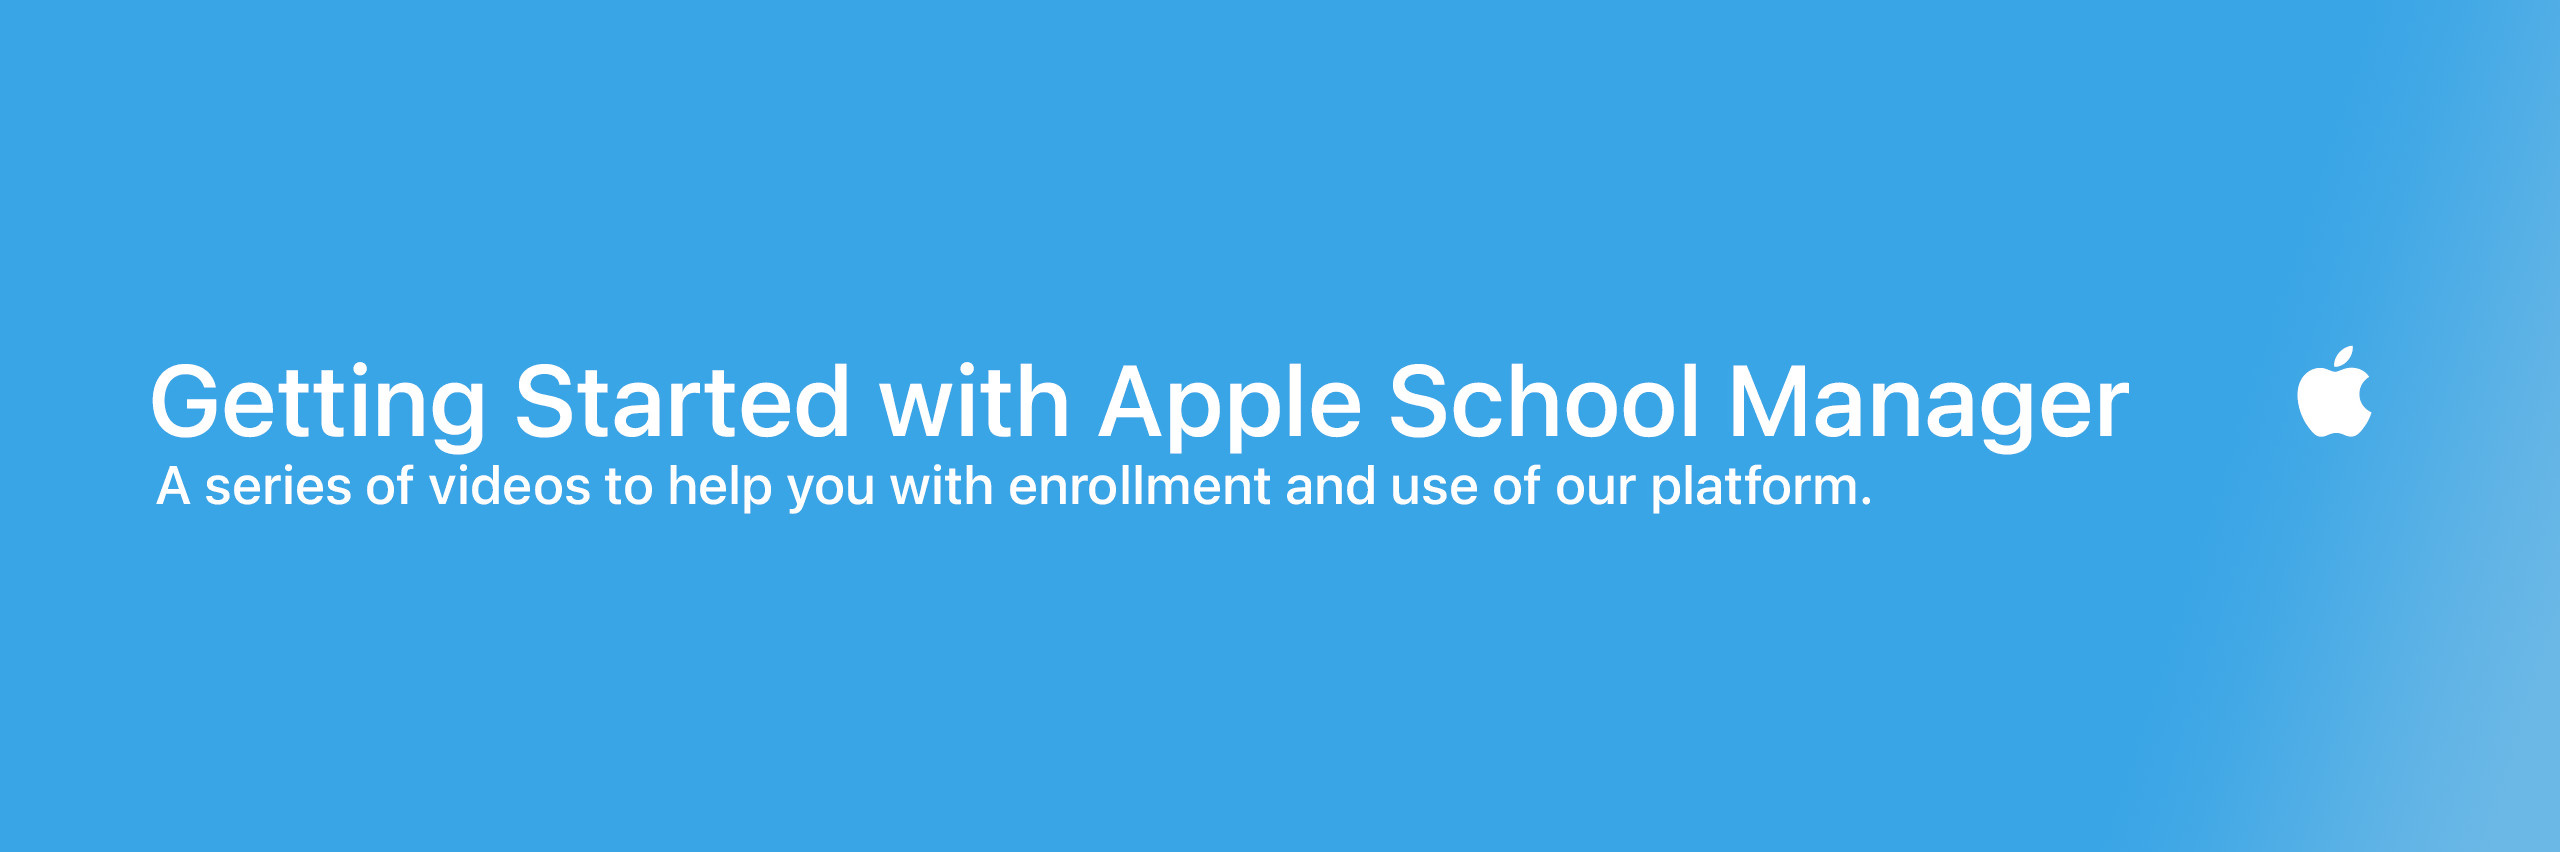 Getting Started with Apple School Manager (2021)